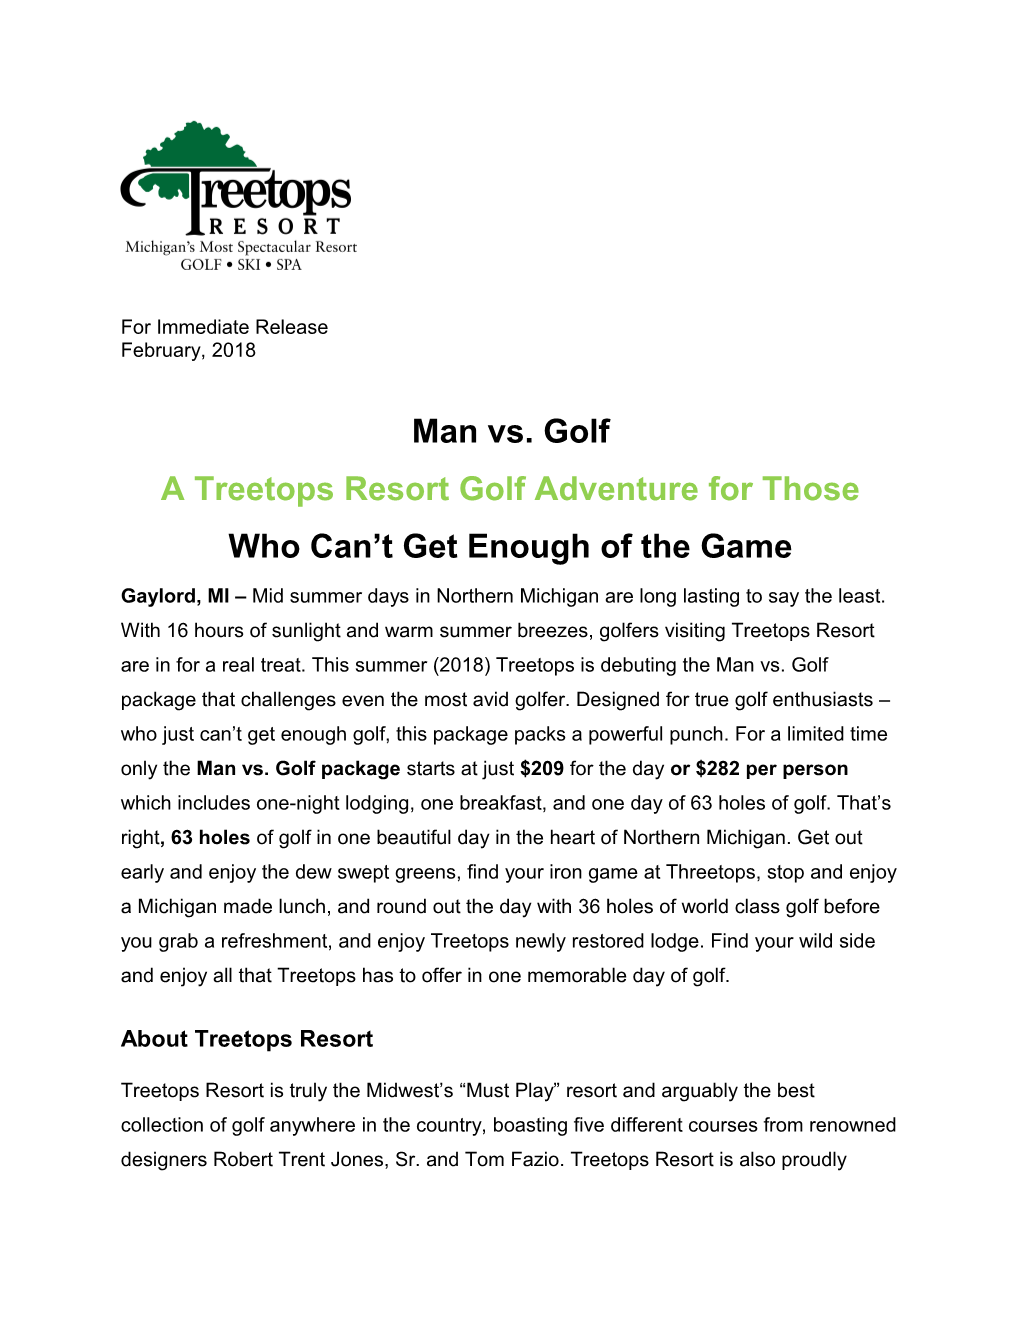 A Treetops Resort Golf Adventure for Those Who Can T Get Enough of the Game